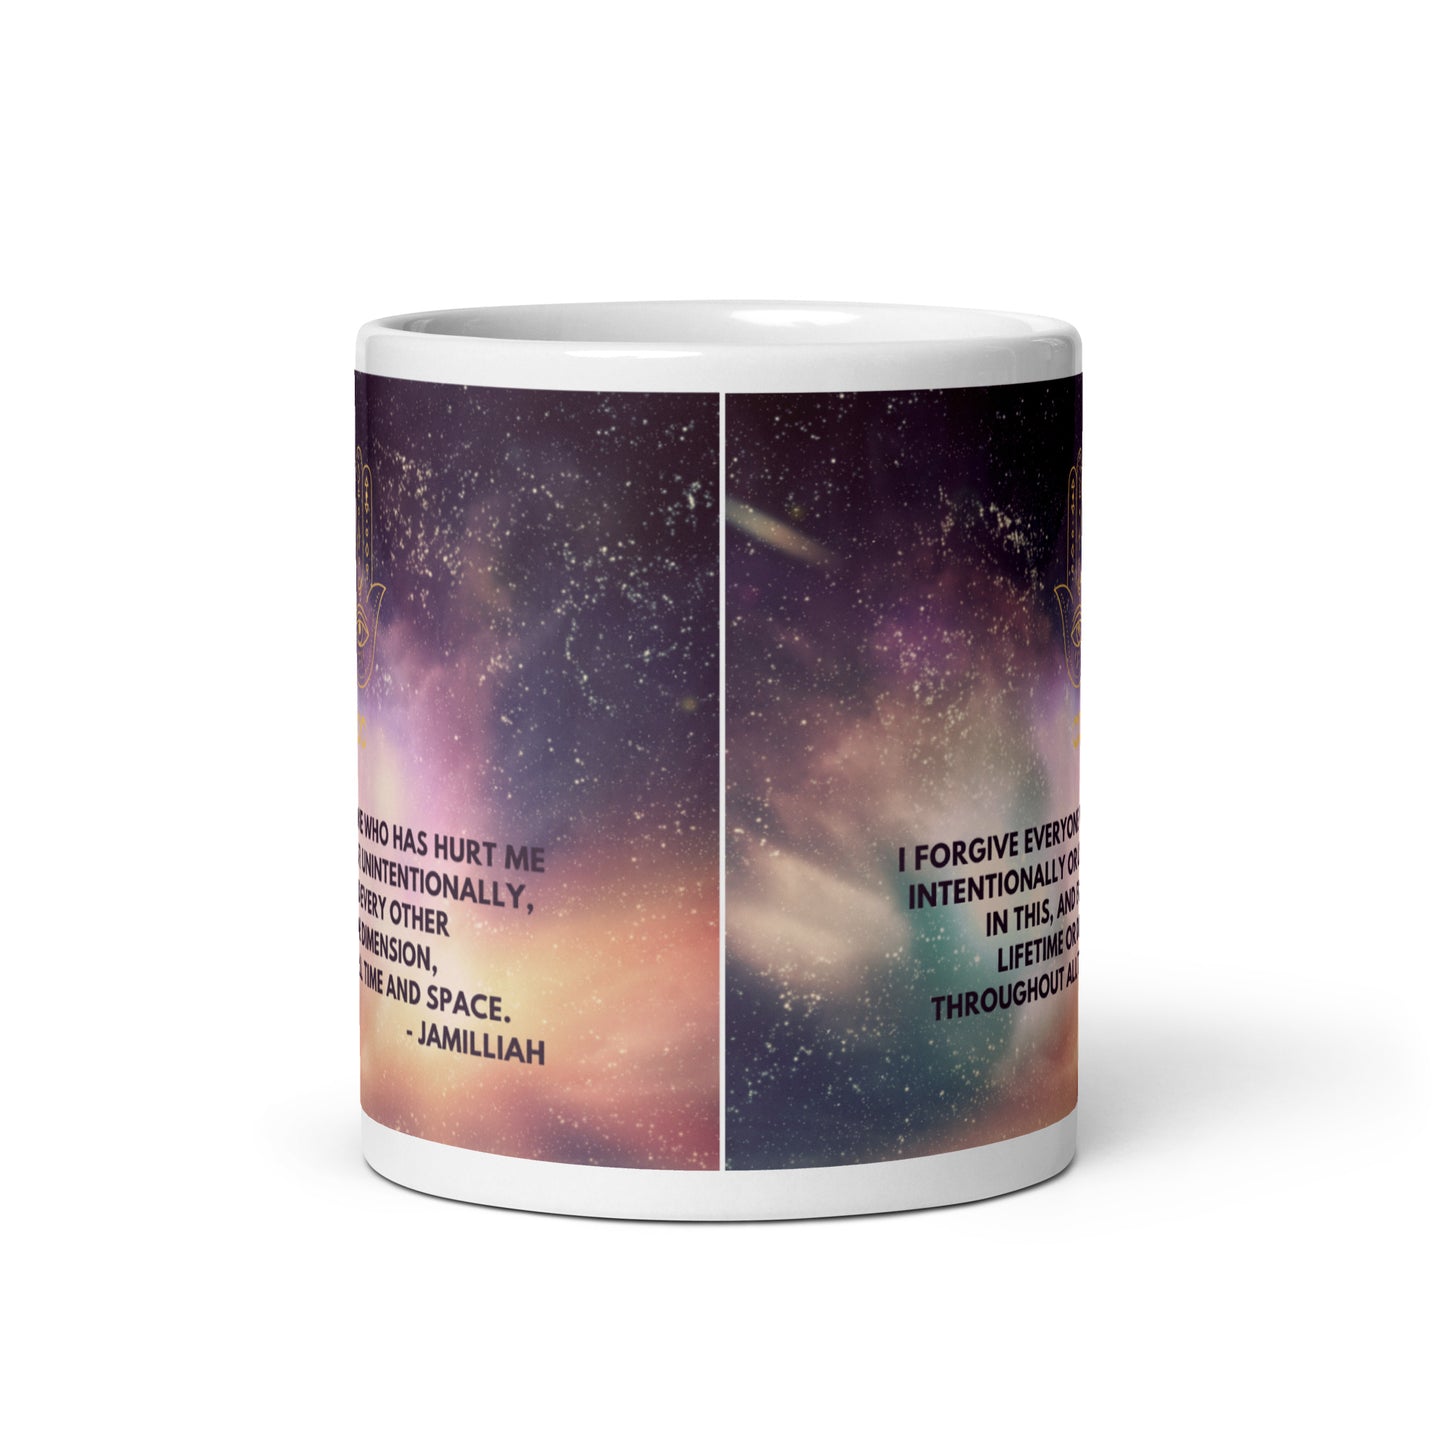 White, purple, green, and yellow cosmos/universe/galaxy/space design. Glossy 11oz mug with original logo and quote, front. Spiritual hamsa hand/infinity symbol logo. Original otherworldly, wise quote. "I Forgive Everyone Who Has Hurt Me Intentionally Or Unintentionally, In This, And Every Other Lifetime Or Dimension, Throughout All Time And Space." - Jamilliah - JAMILLIAH'S WISDOM IS TIMELESS SHOP - wisdomistimeless.com.